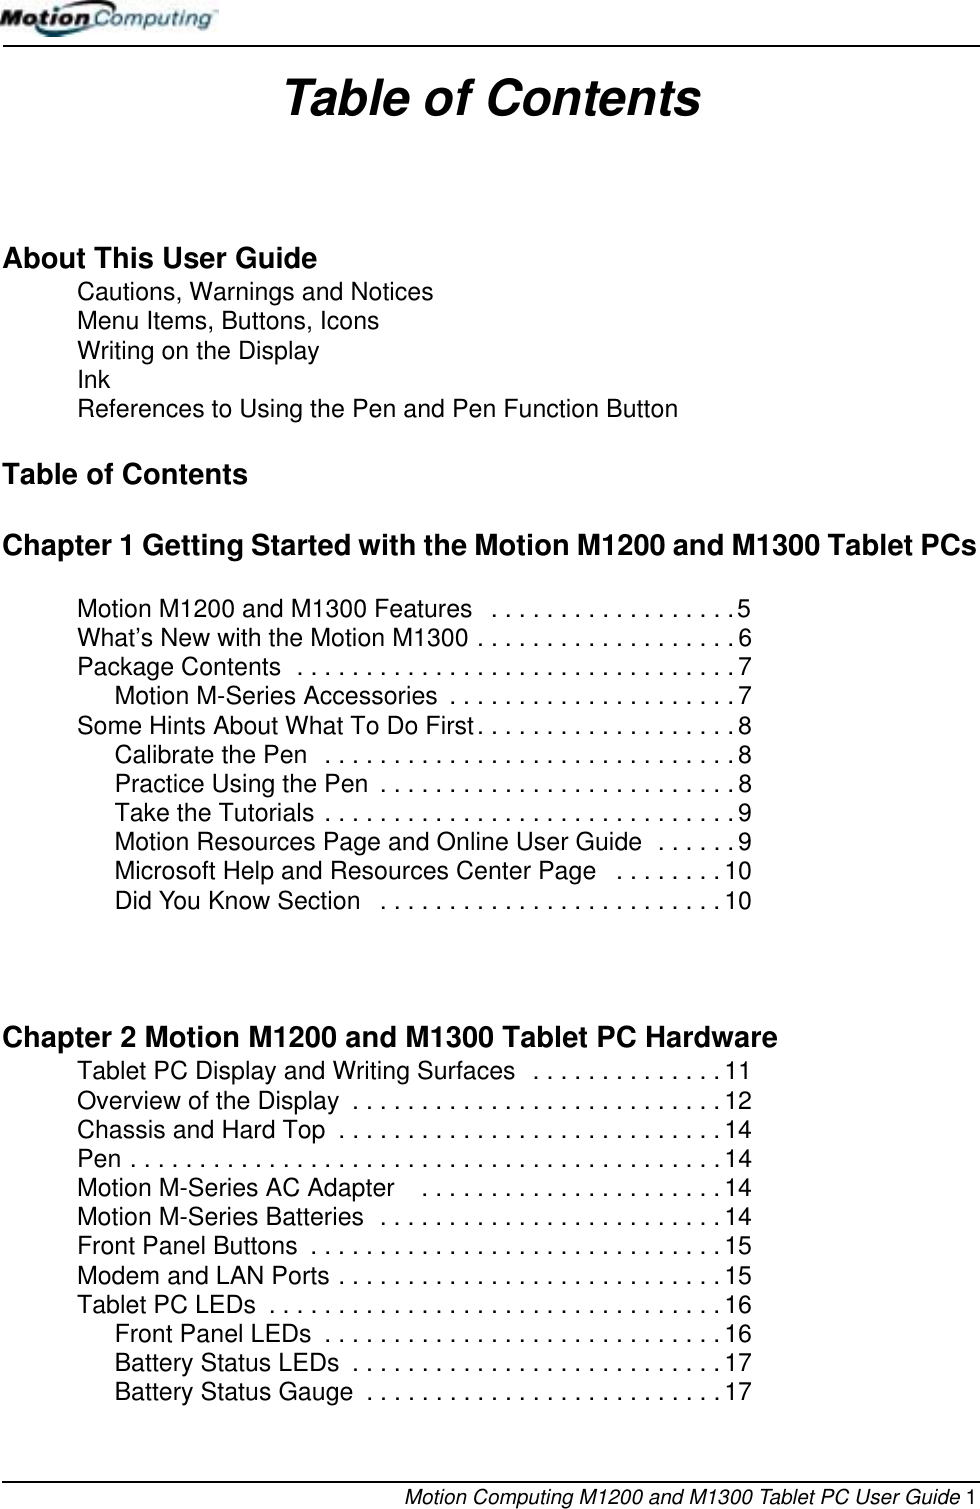 Motion Computing M1200 and M1300 Tablet PC User Guide 1Table of ContentsAbout This User GuideCautions, Warnings and Notices Menu Items, Buttons, Icons Writing on the Display Ink References to Using the Pen and Pen Function Button Table of ContentsChapter 1 Getting Started with the Motion M1200 and M1300 Tablet PCsMotion M1200 and M1300 Features   . . . . . . . . . . . . . . . . . .5What’s New with the Motion M1300 . . . . . . . . . . . . . . . . . . .6Package Contents  . . . . . . . . . . . . . . . . . . . . . . . . . . . . . . . . 7Motion M-Series Accessories  . . . . . . . . . . . . . . . . . . . . . 7Some Hints About What To Do First. . . . . . . . . . . . . . . . . . . 8Calibrate the Pen  . . . . . . . . . . . . . . . . . . . . . . . . . . . . . .8Practice Using the Pen  . . . . . . . . . . . . . . . . . . . . . . . . . .8Take the Tutorials . . . . . . . . . . . . . . . . . . . . . . . . . . . . . . 9Motion Resources Page and Online User Guide  . . . . . . 9Microsoft Help and Resources Center Page   . . . . . . . . 10Did You Know Section   . . . . . . . . . . . . . . . . . . . . . . . . .10Chapter 2 Motion M1200 and M1300 Tablet PC HardwareTablet PC Display and Writing Surfaces  . . . . . . . . . . . . . .11Overview of the Display  . . . . . . . . . . . . . . . . . . . . . . . . . . . 12Chassis and Hard Top  . . . . . . . . . . . . . . . . . . . . . . . . . . . . 14Pen . . . . . . . . . . . . . . . . . . . . . . . . . . . . . . . . . . . . . . . . . . .14Motion M-Series AC Adapter    . . . . . . . . . . . . . . . . . . . . . . 14Motion M-Series Batteries  . . . . . . . . . . . . . . . . . . . . . . . . . 14Front Panel Buttons  . . . . . . . . . . . . . . . . . . . . . . . . . . . . . . 15Modem and LAN Ports . . . . . . . . . . . . . . . . . . . . . . . . . . . .15Tablet PC LEDs  . . . . . . . . . . . . . . . . . . . . . . . . . . . . . . . . .16Front Panel LEDs  . . . . . . . . . . . . . . . . . . . . . . . . . . . . .16Battery Status LEDs  . . . . . . . . . . . . . . . . . . . . . . . . . . . 17Battery Status Gauge  . . . . . . . . . . . . . . . . . . . . . . . . . .17